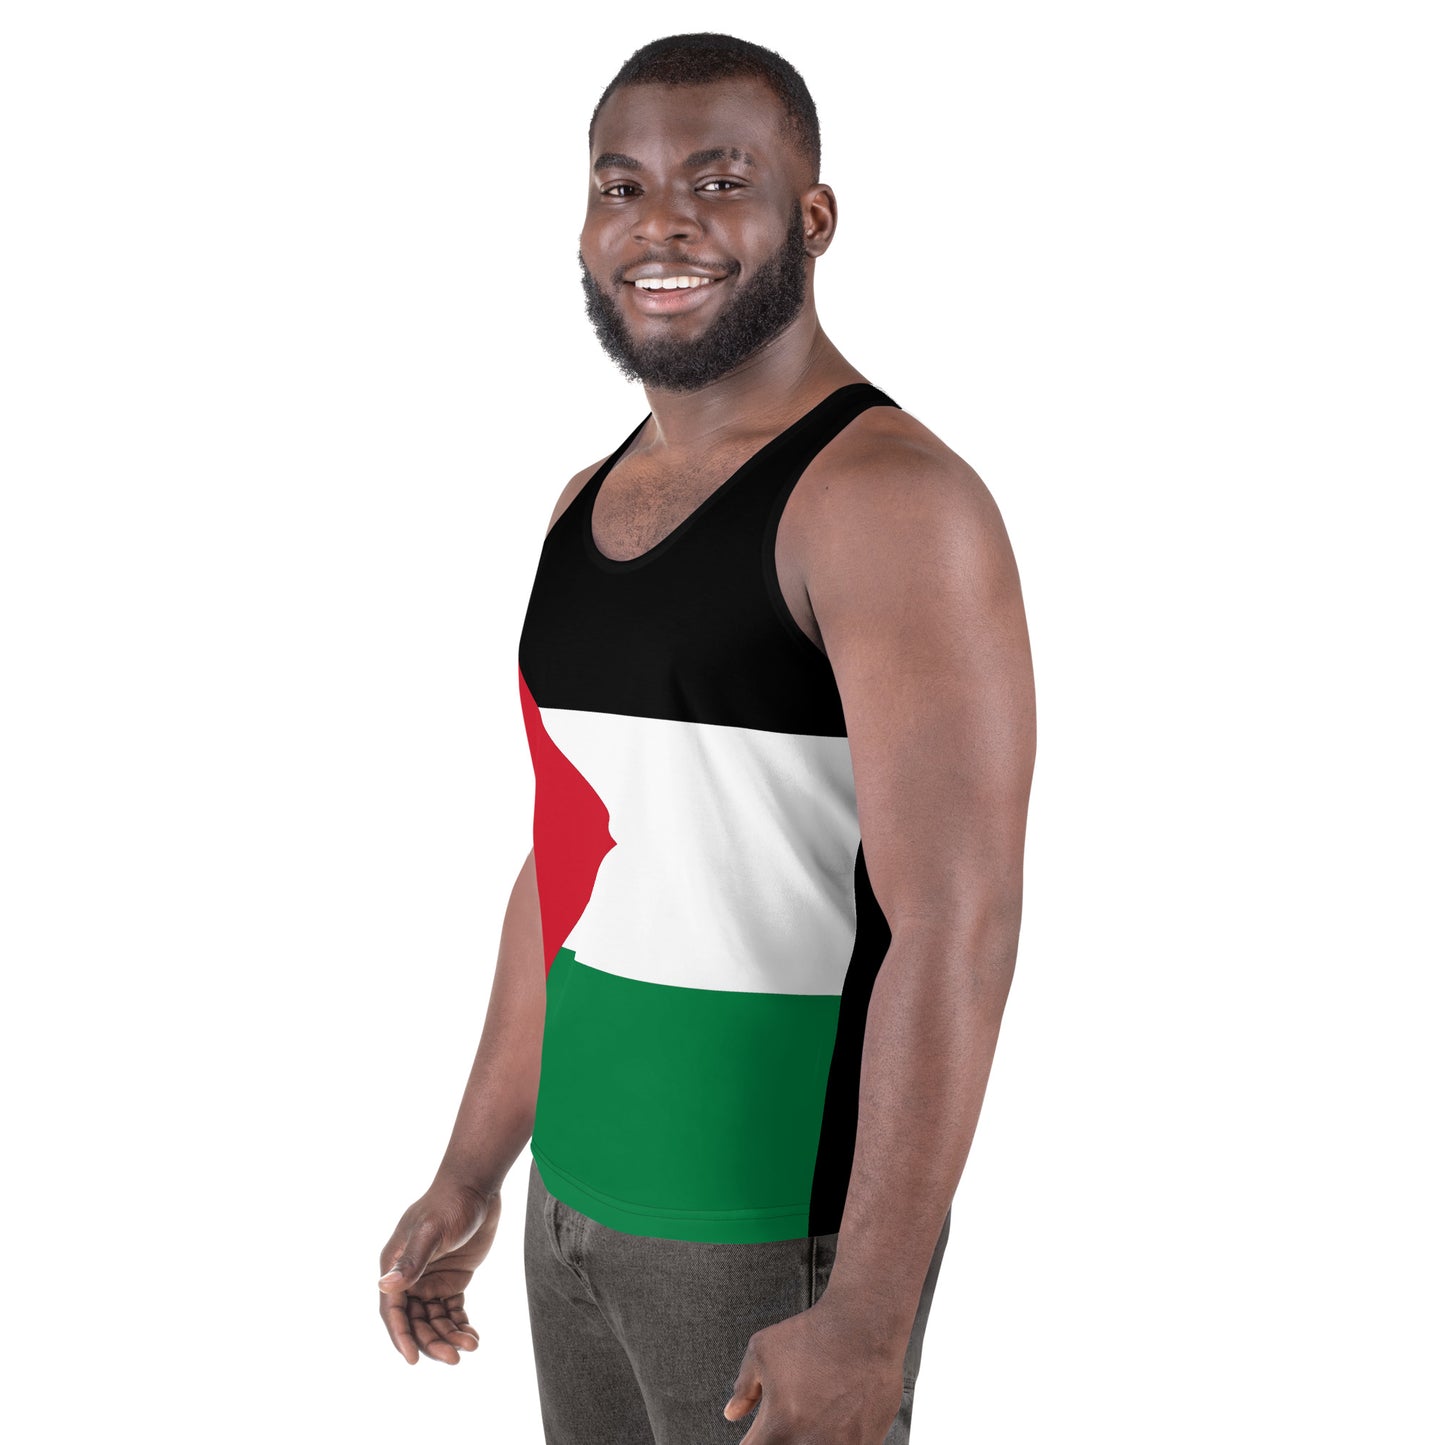 Heritage-Inspired Tank Top for Men - Palestine Edition